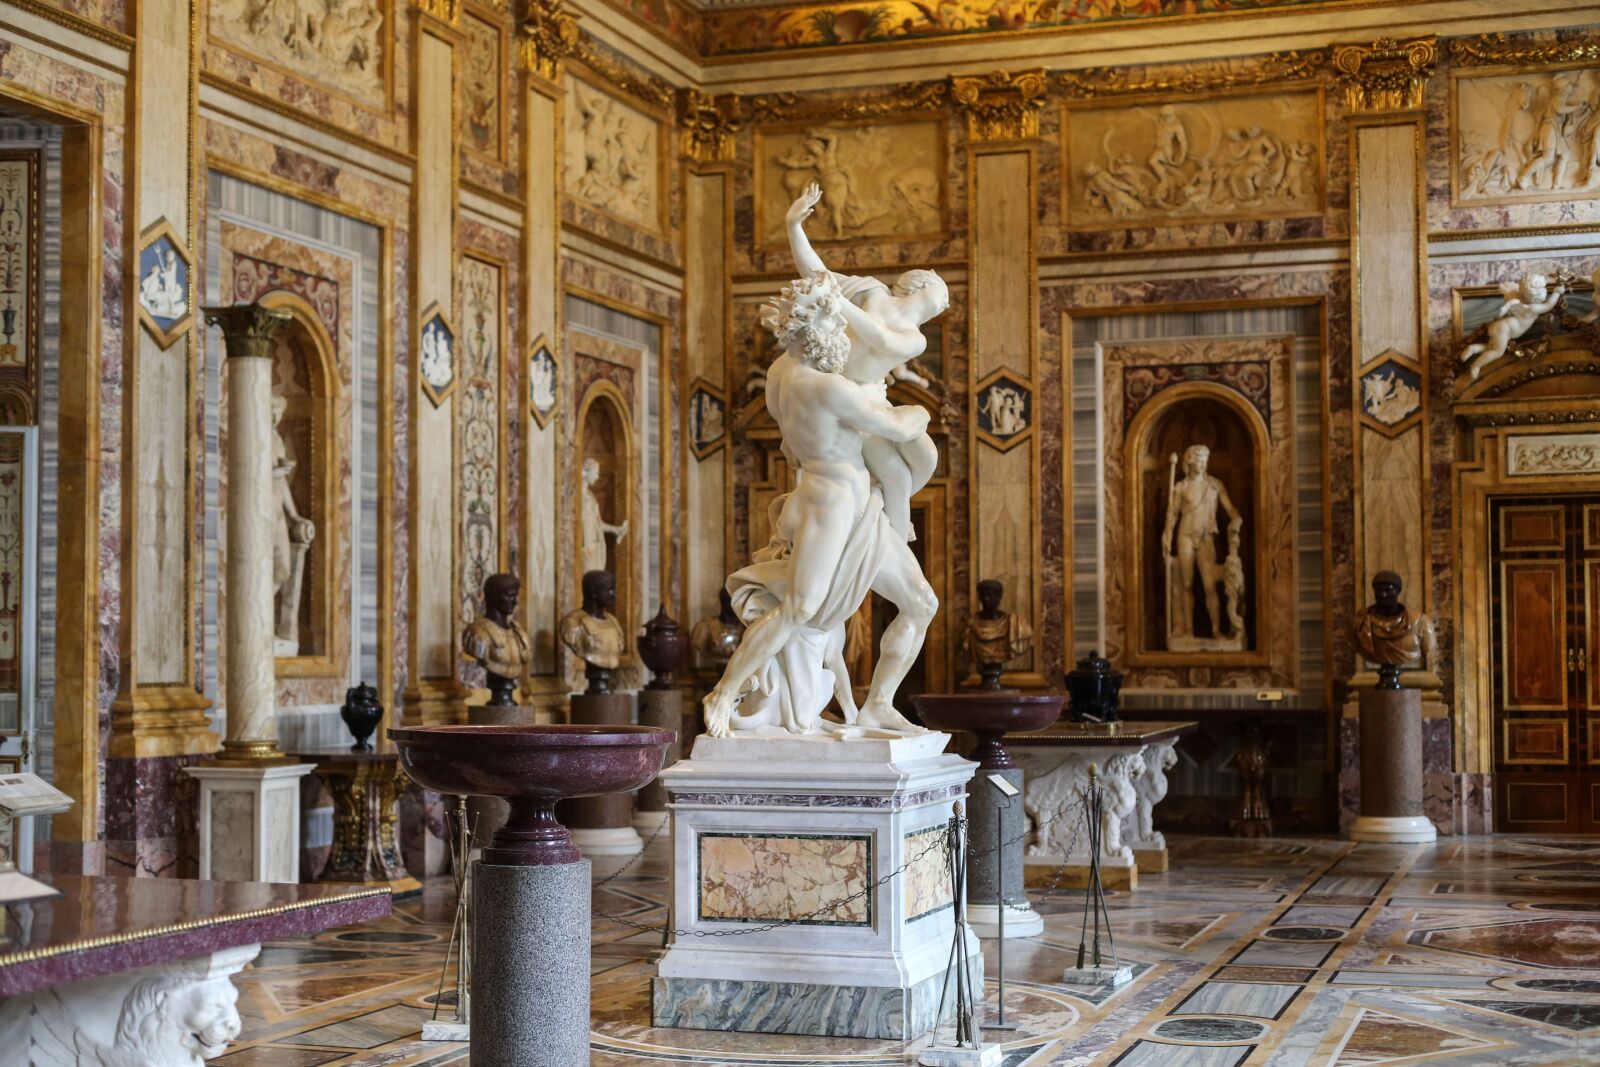 museums in rome - art at the borghese gallery